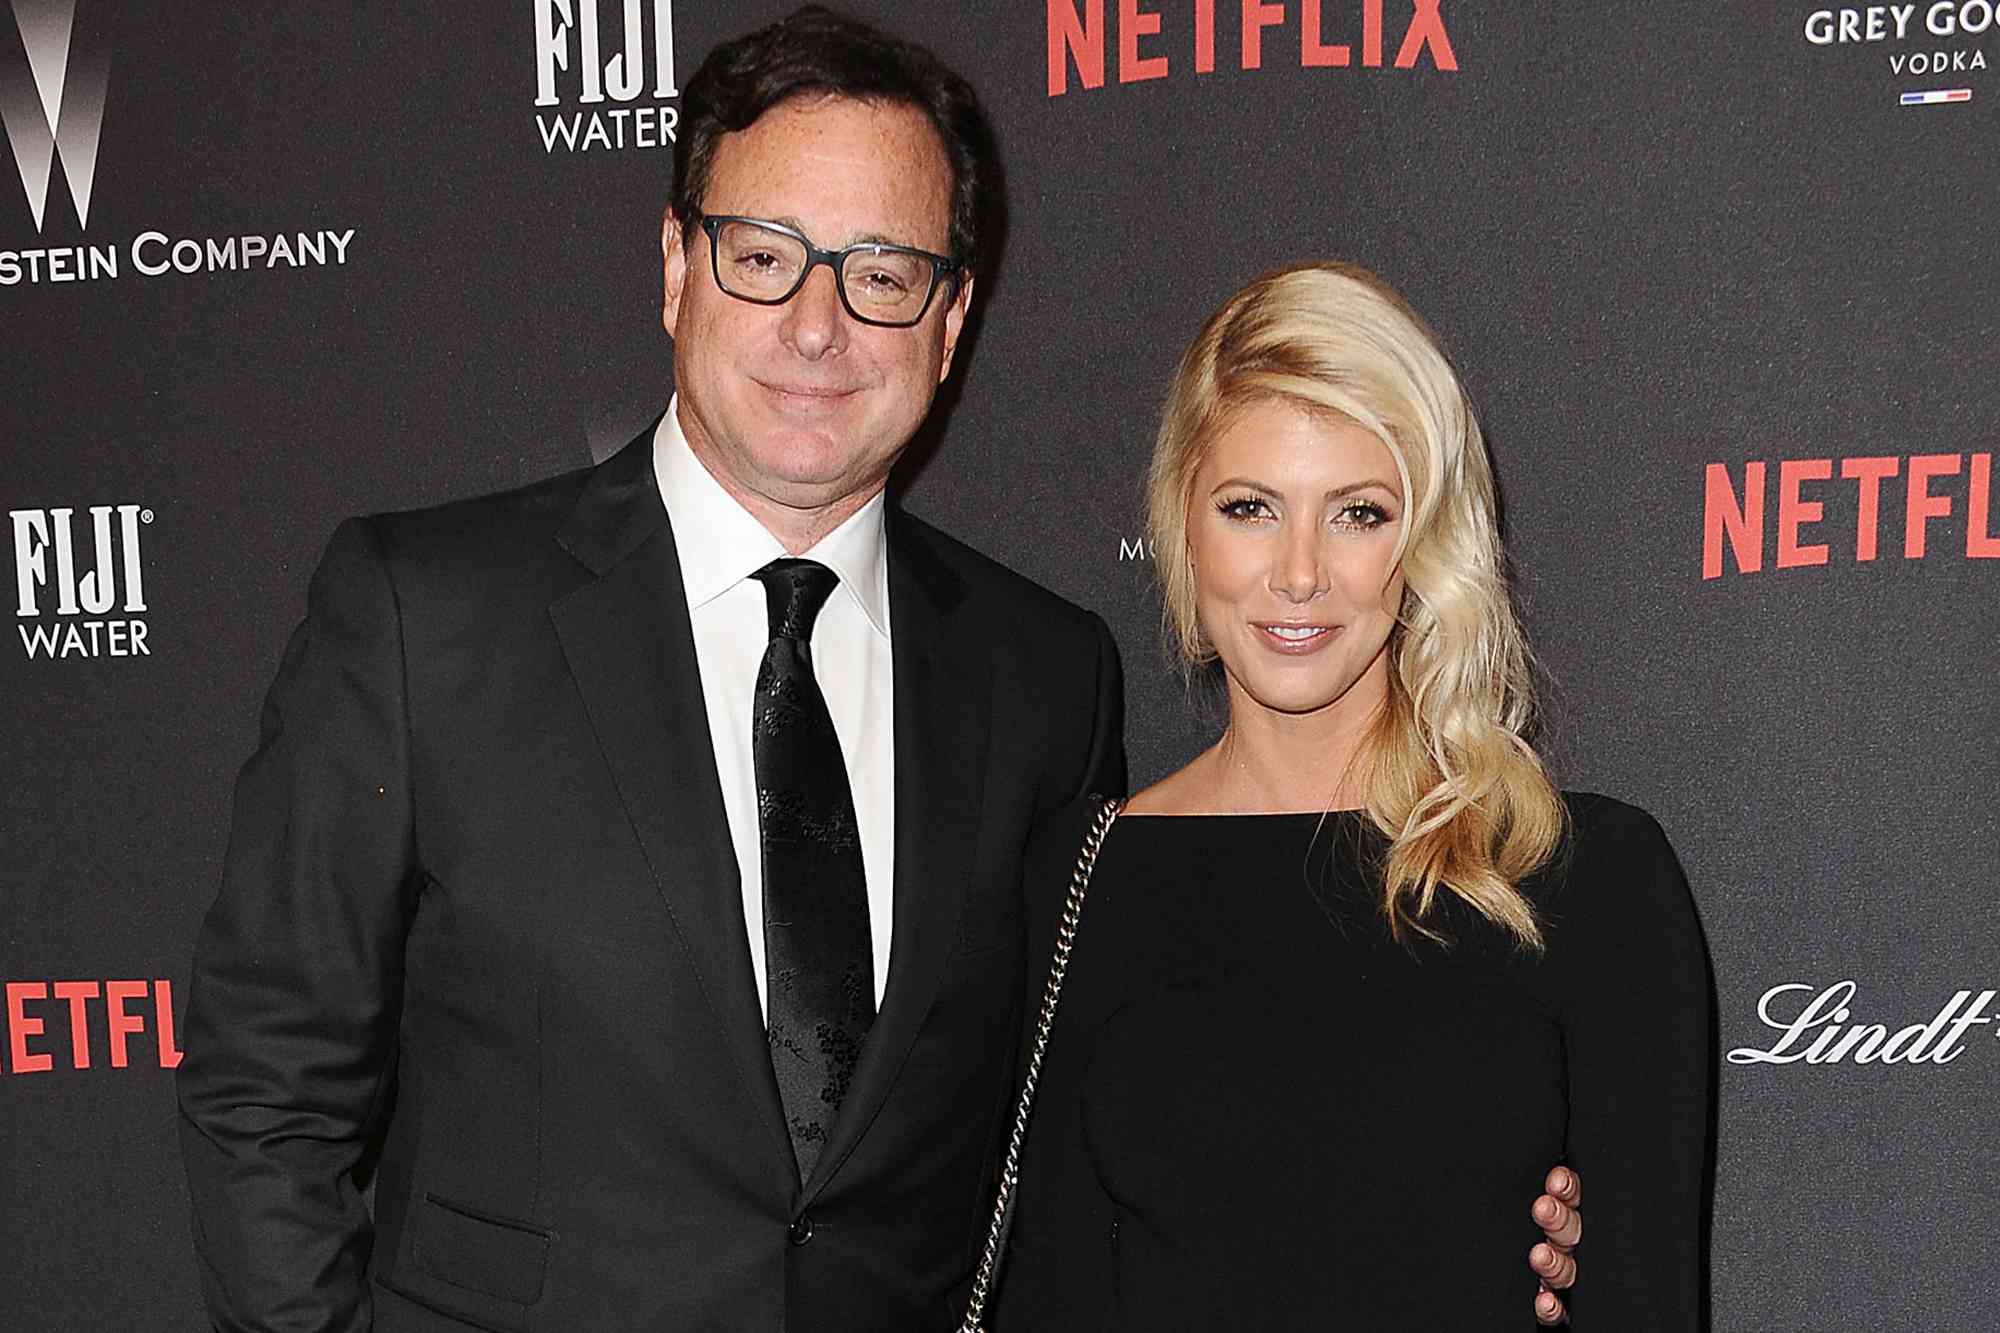 Kelly Rizzo Celebrates Late Husband Bob Saget's Would-Be 68th Birthday: 'Forever Celebrated, Forever Loved'